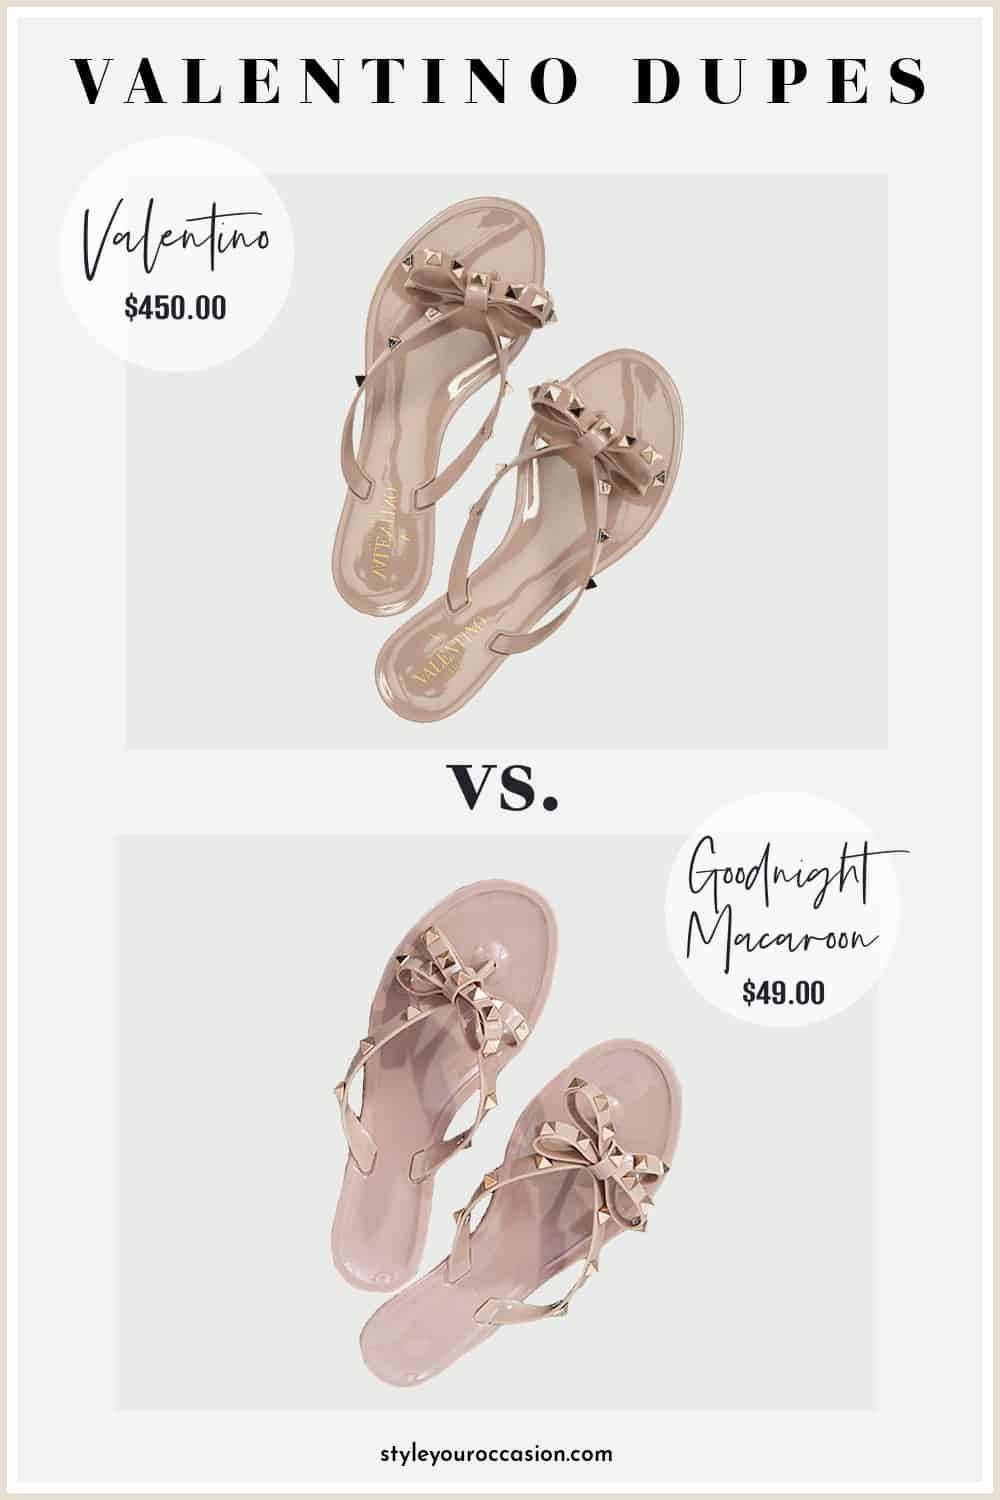 image of a pair of nude jelly sandals with a bow detail and stud decor and a pair of look-alike sandals